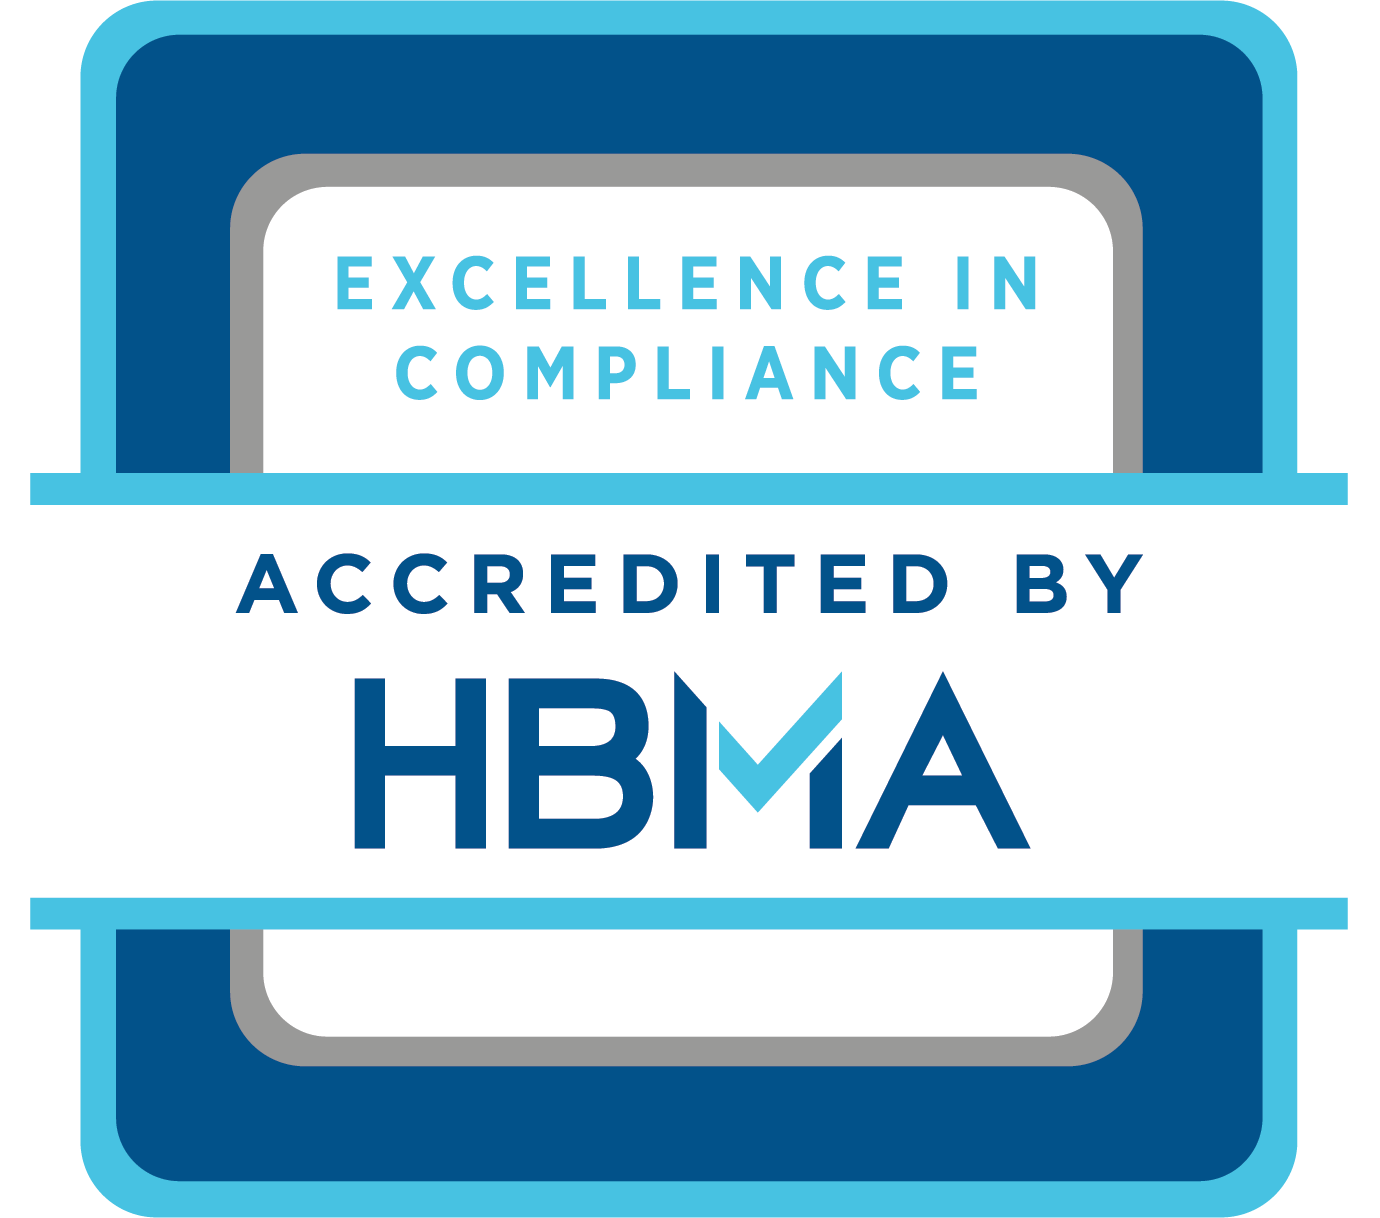 Emax Medical Billing LLC is accredited by HBMA